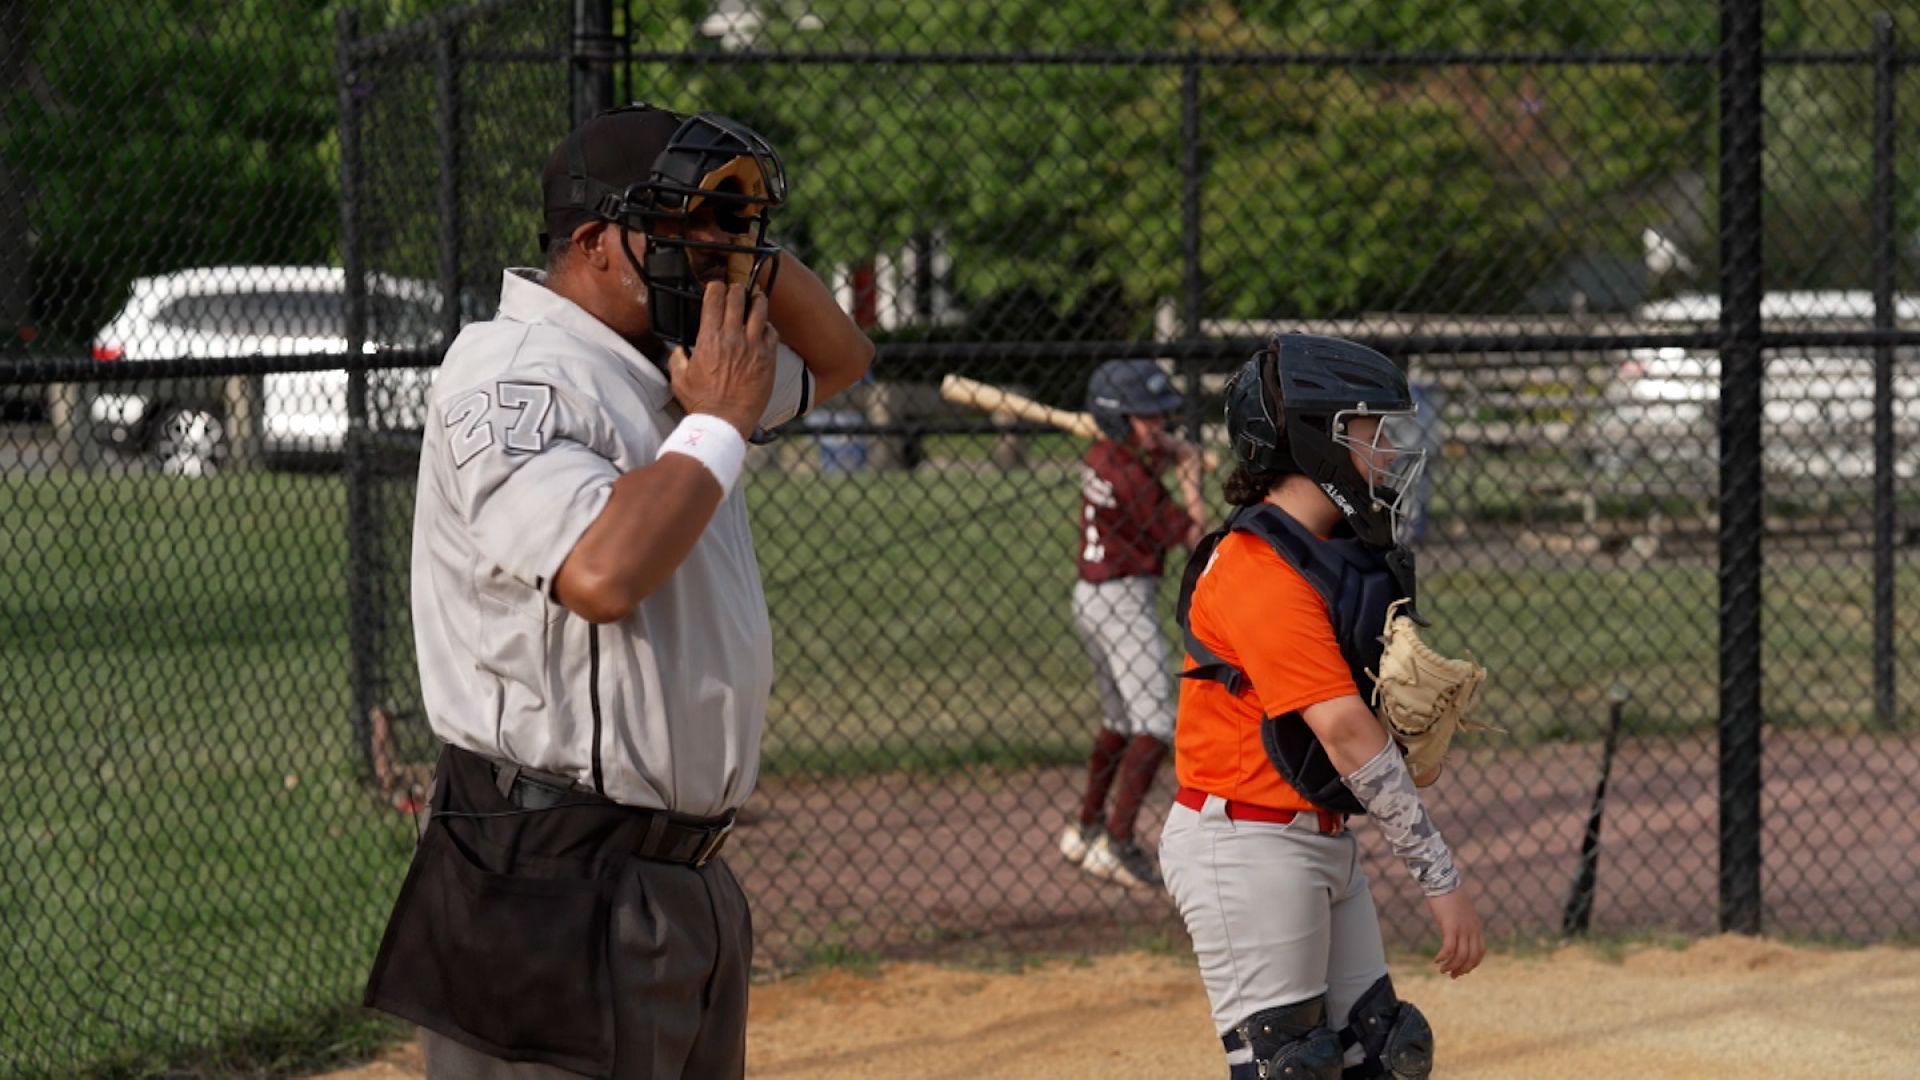 America has an umpire shortage. Unruly parents aren't helping